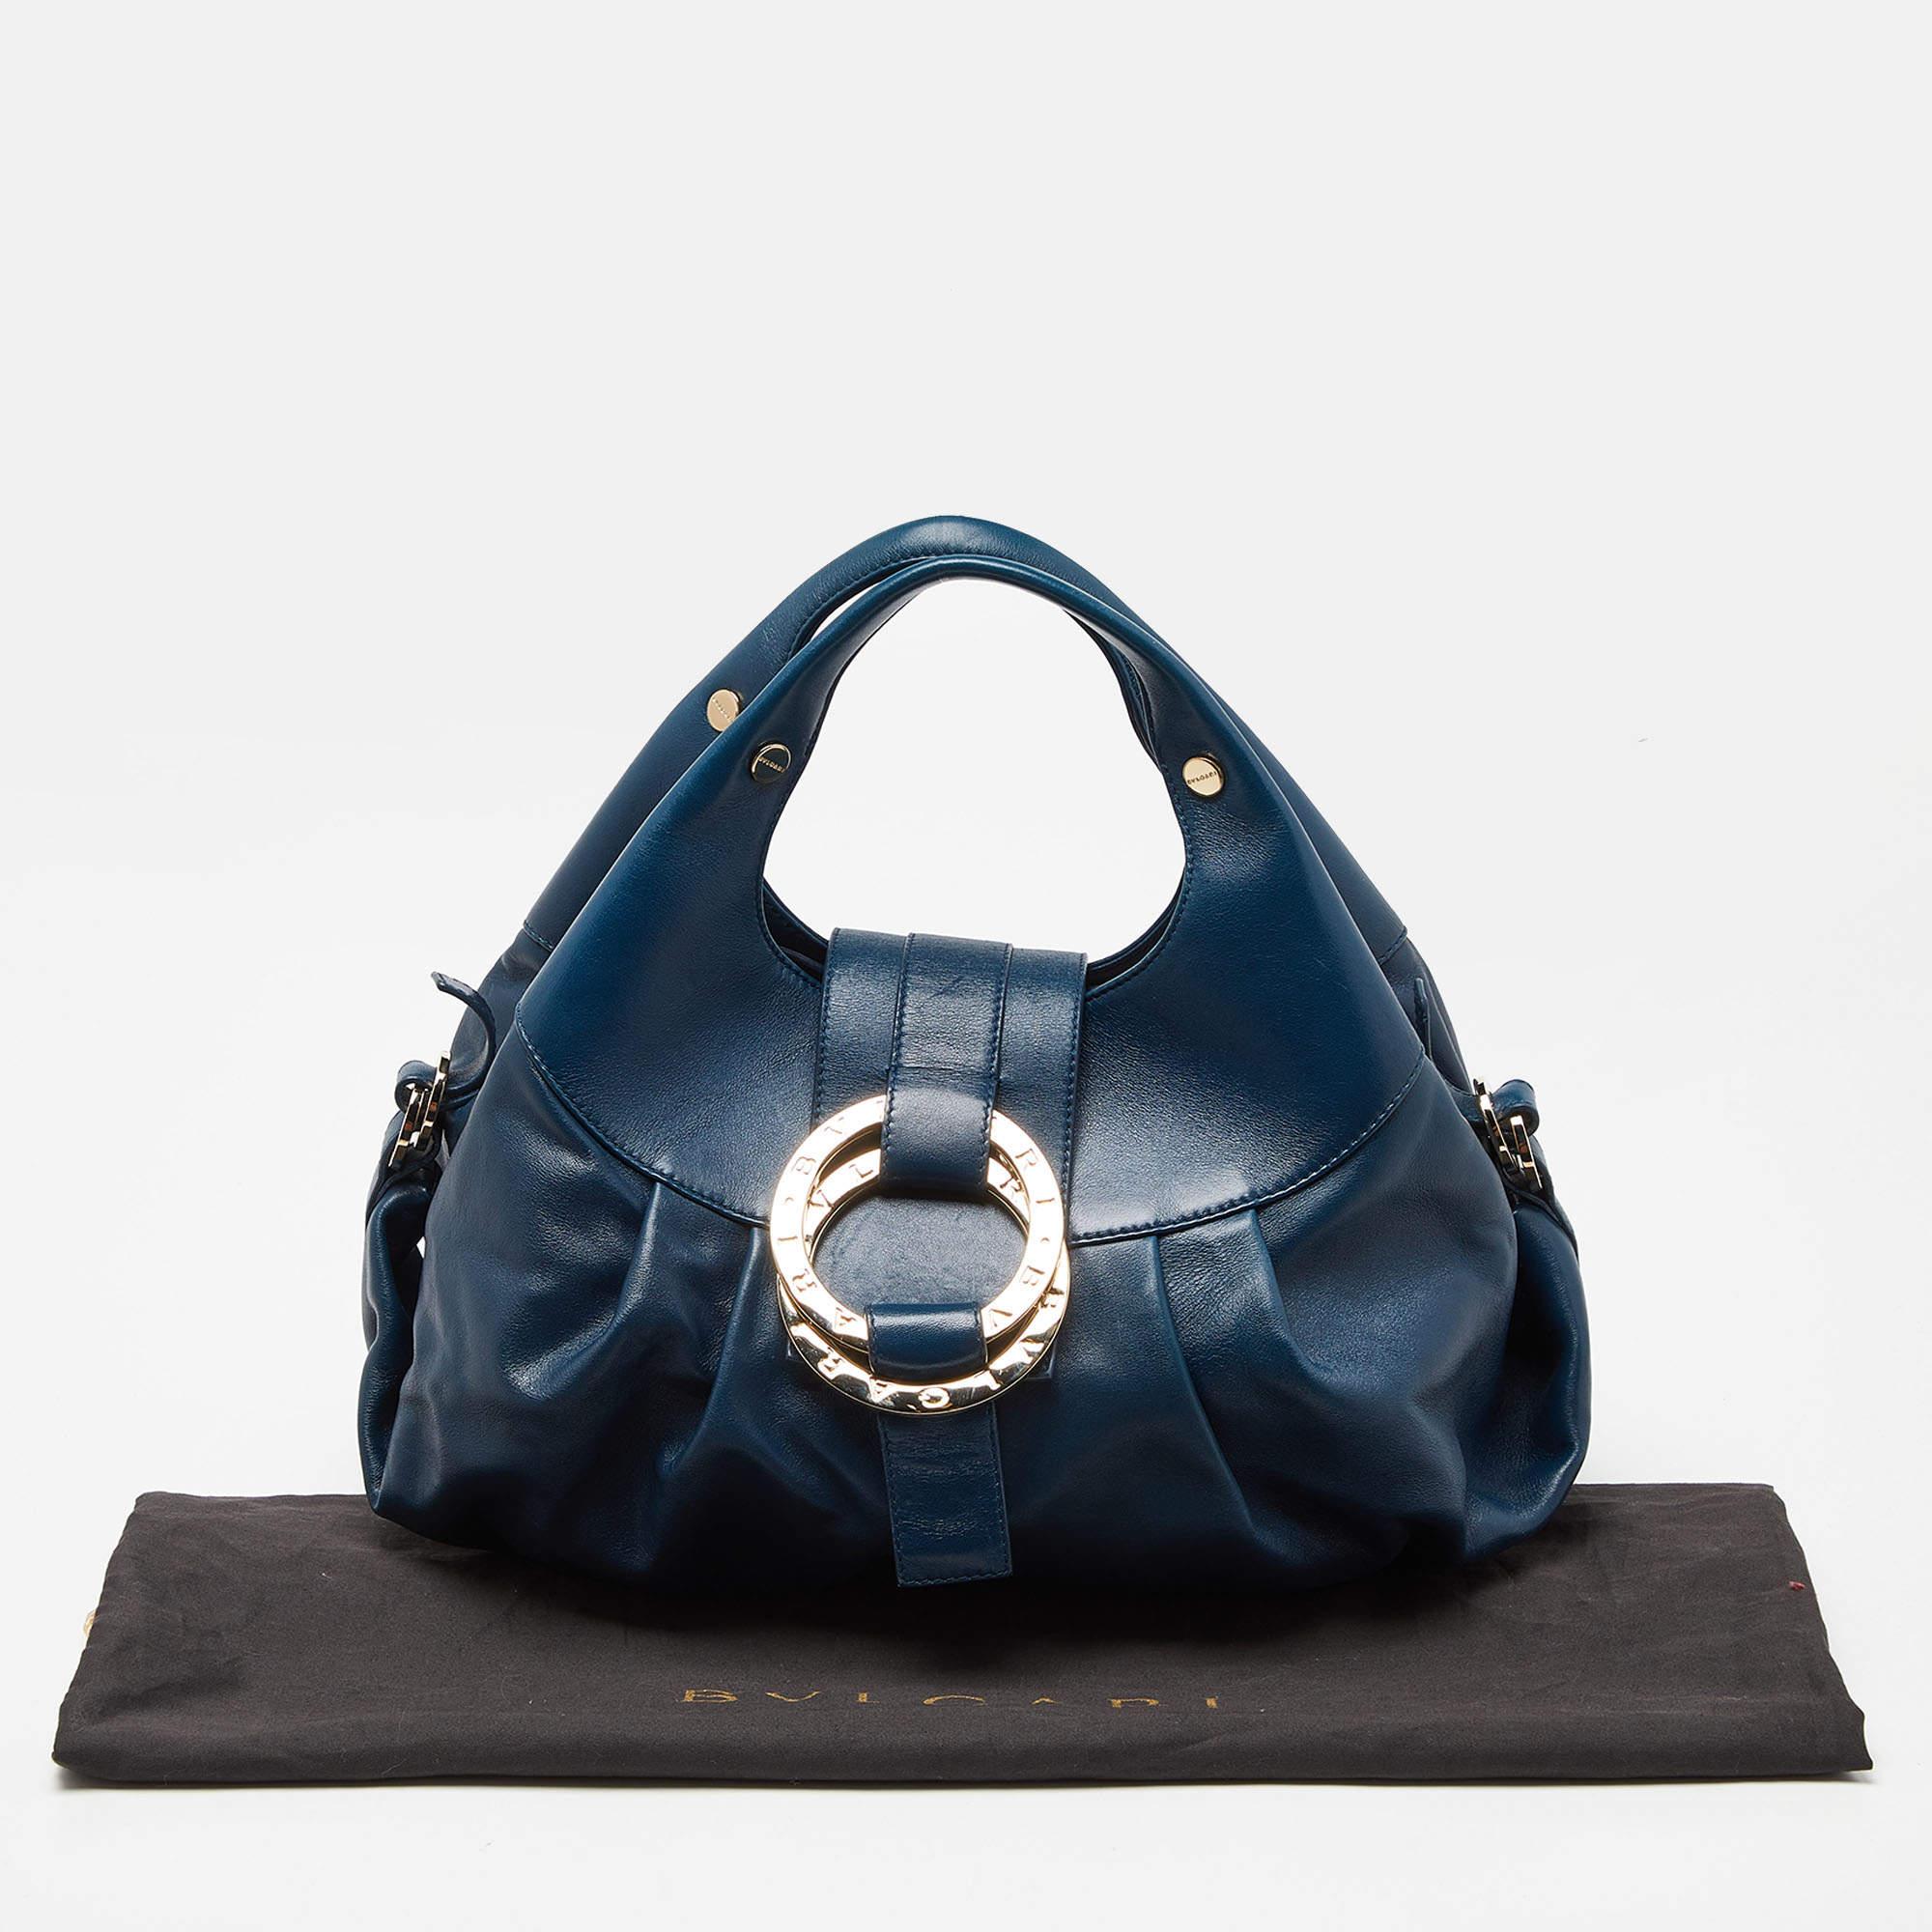 Bvlgari Teal Blue Leather Chandra Hobo For Sale 8